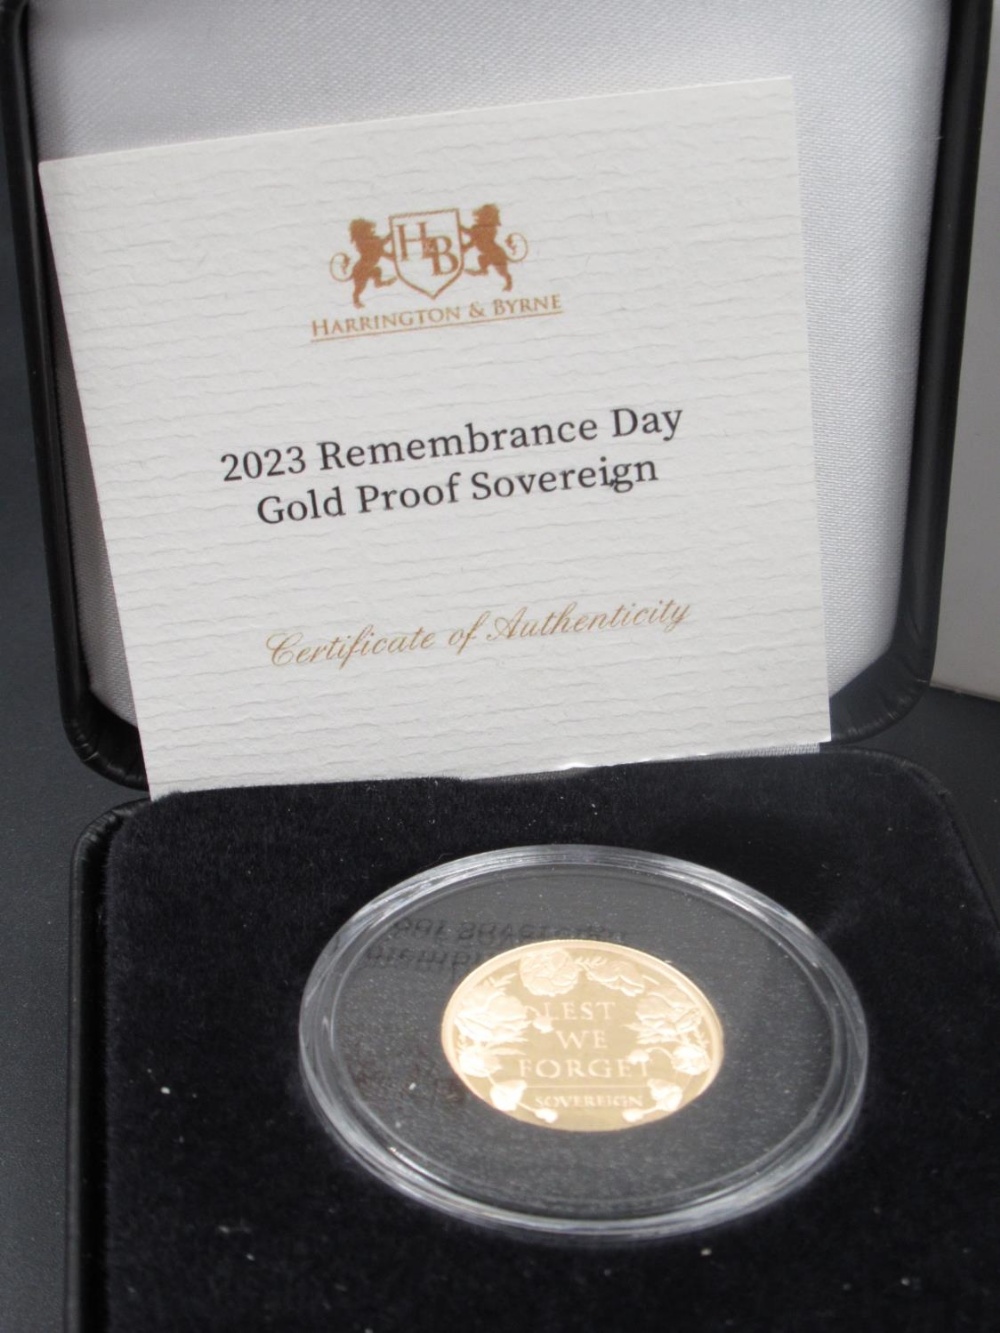 Harrington & Byrne 2023 Remembrance Day Gold Proof Sovereign, country of issue Ascension Island, - Image 2 of 2